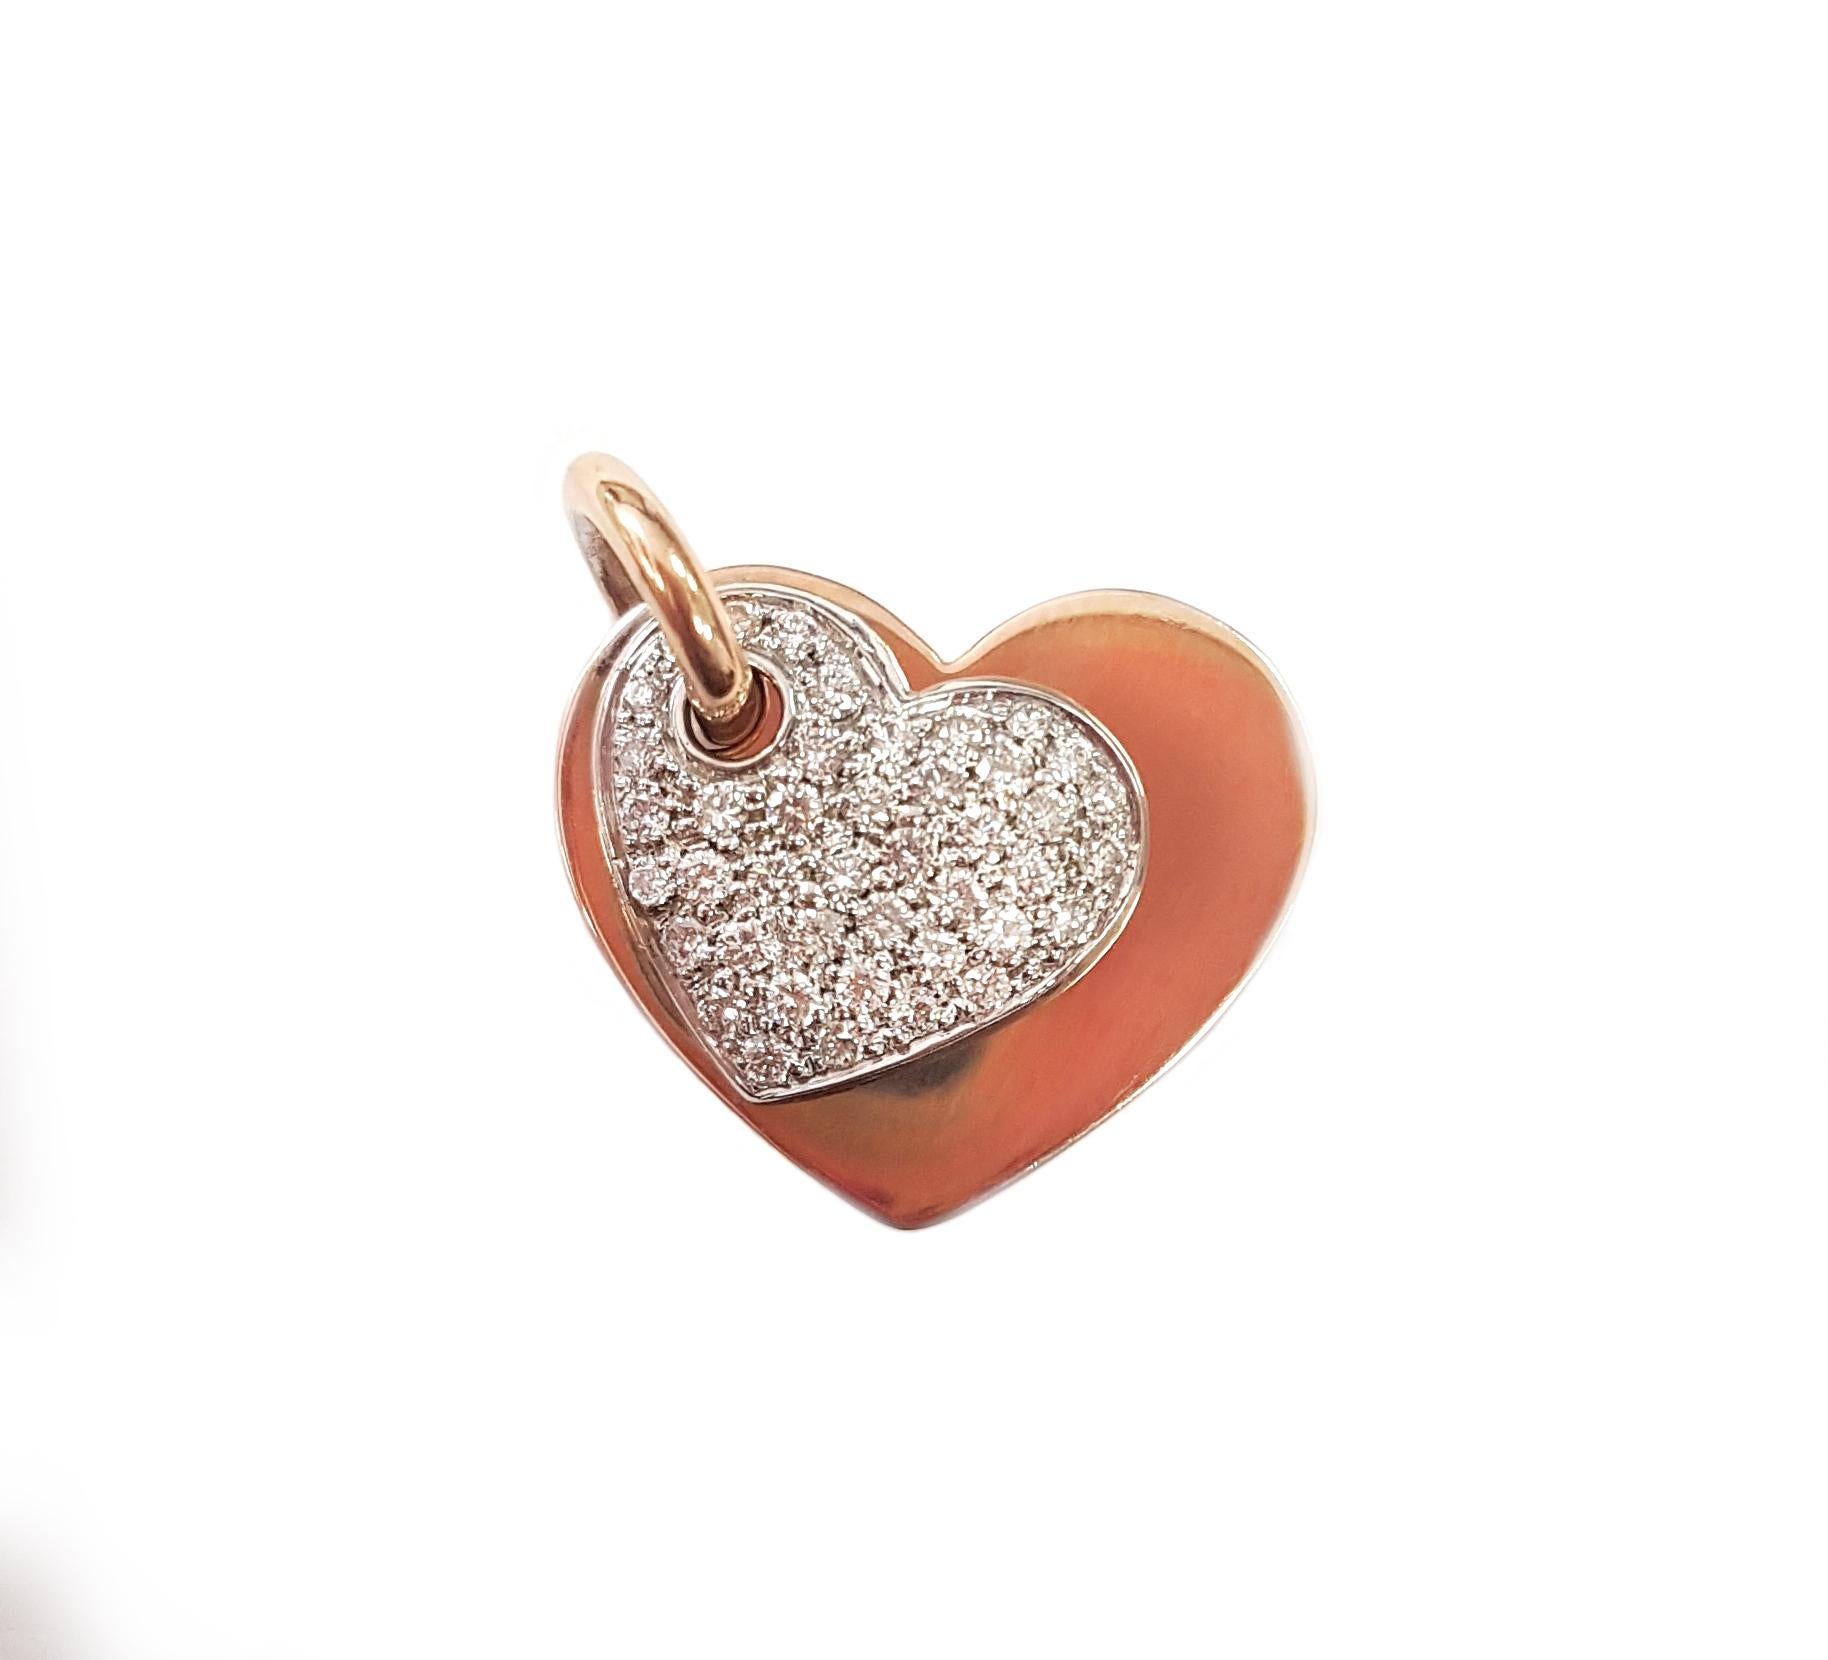 This is an 18-karat rose and white gold heart-shaped pendant; the white gold is pavé-set with white diamonds. 

The pendant is 2 centimetres wide and 2.3 centimetres long. Add it to any rose gold chain to match the finding (bail). 

Are you looking